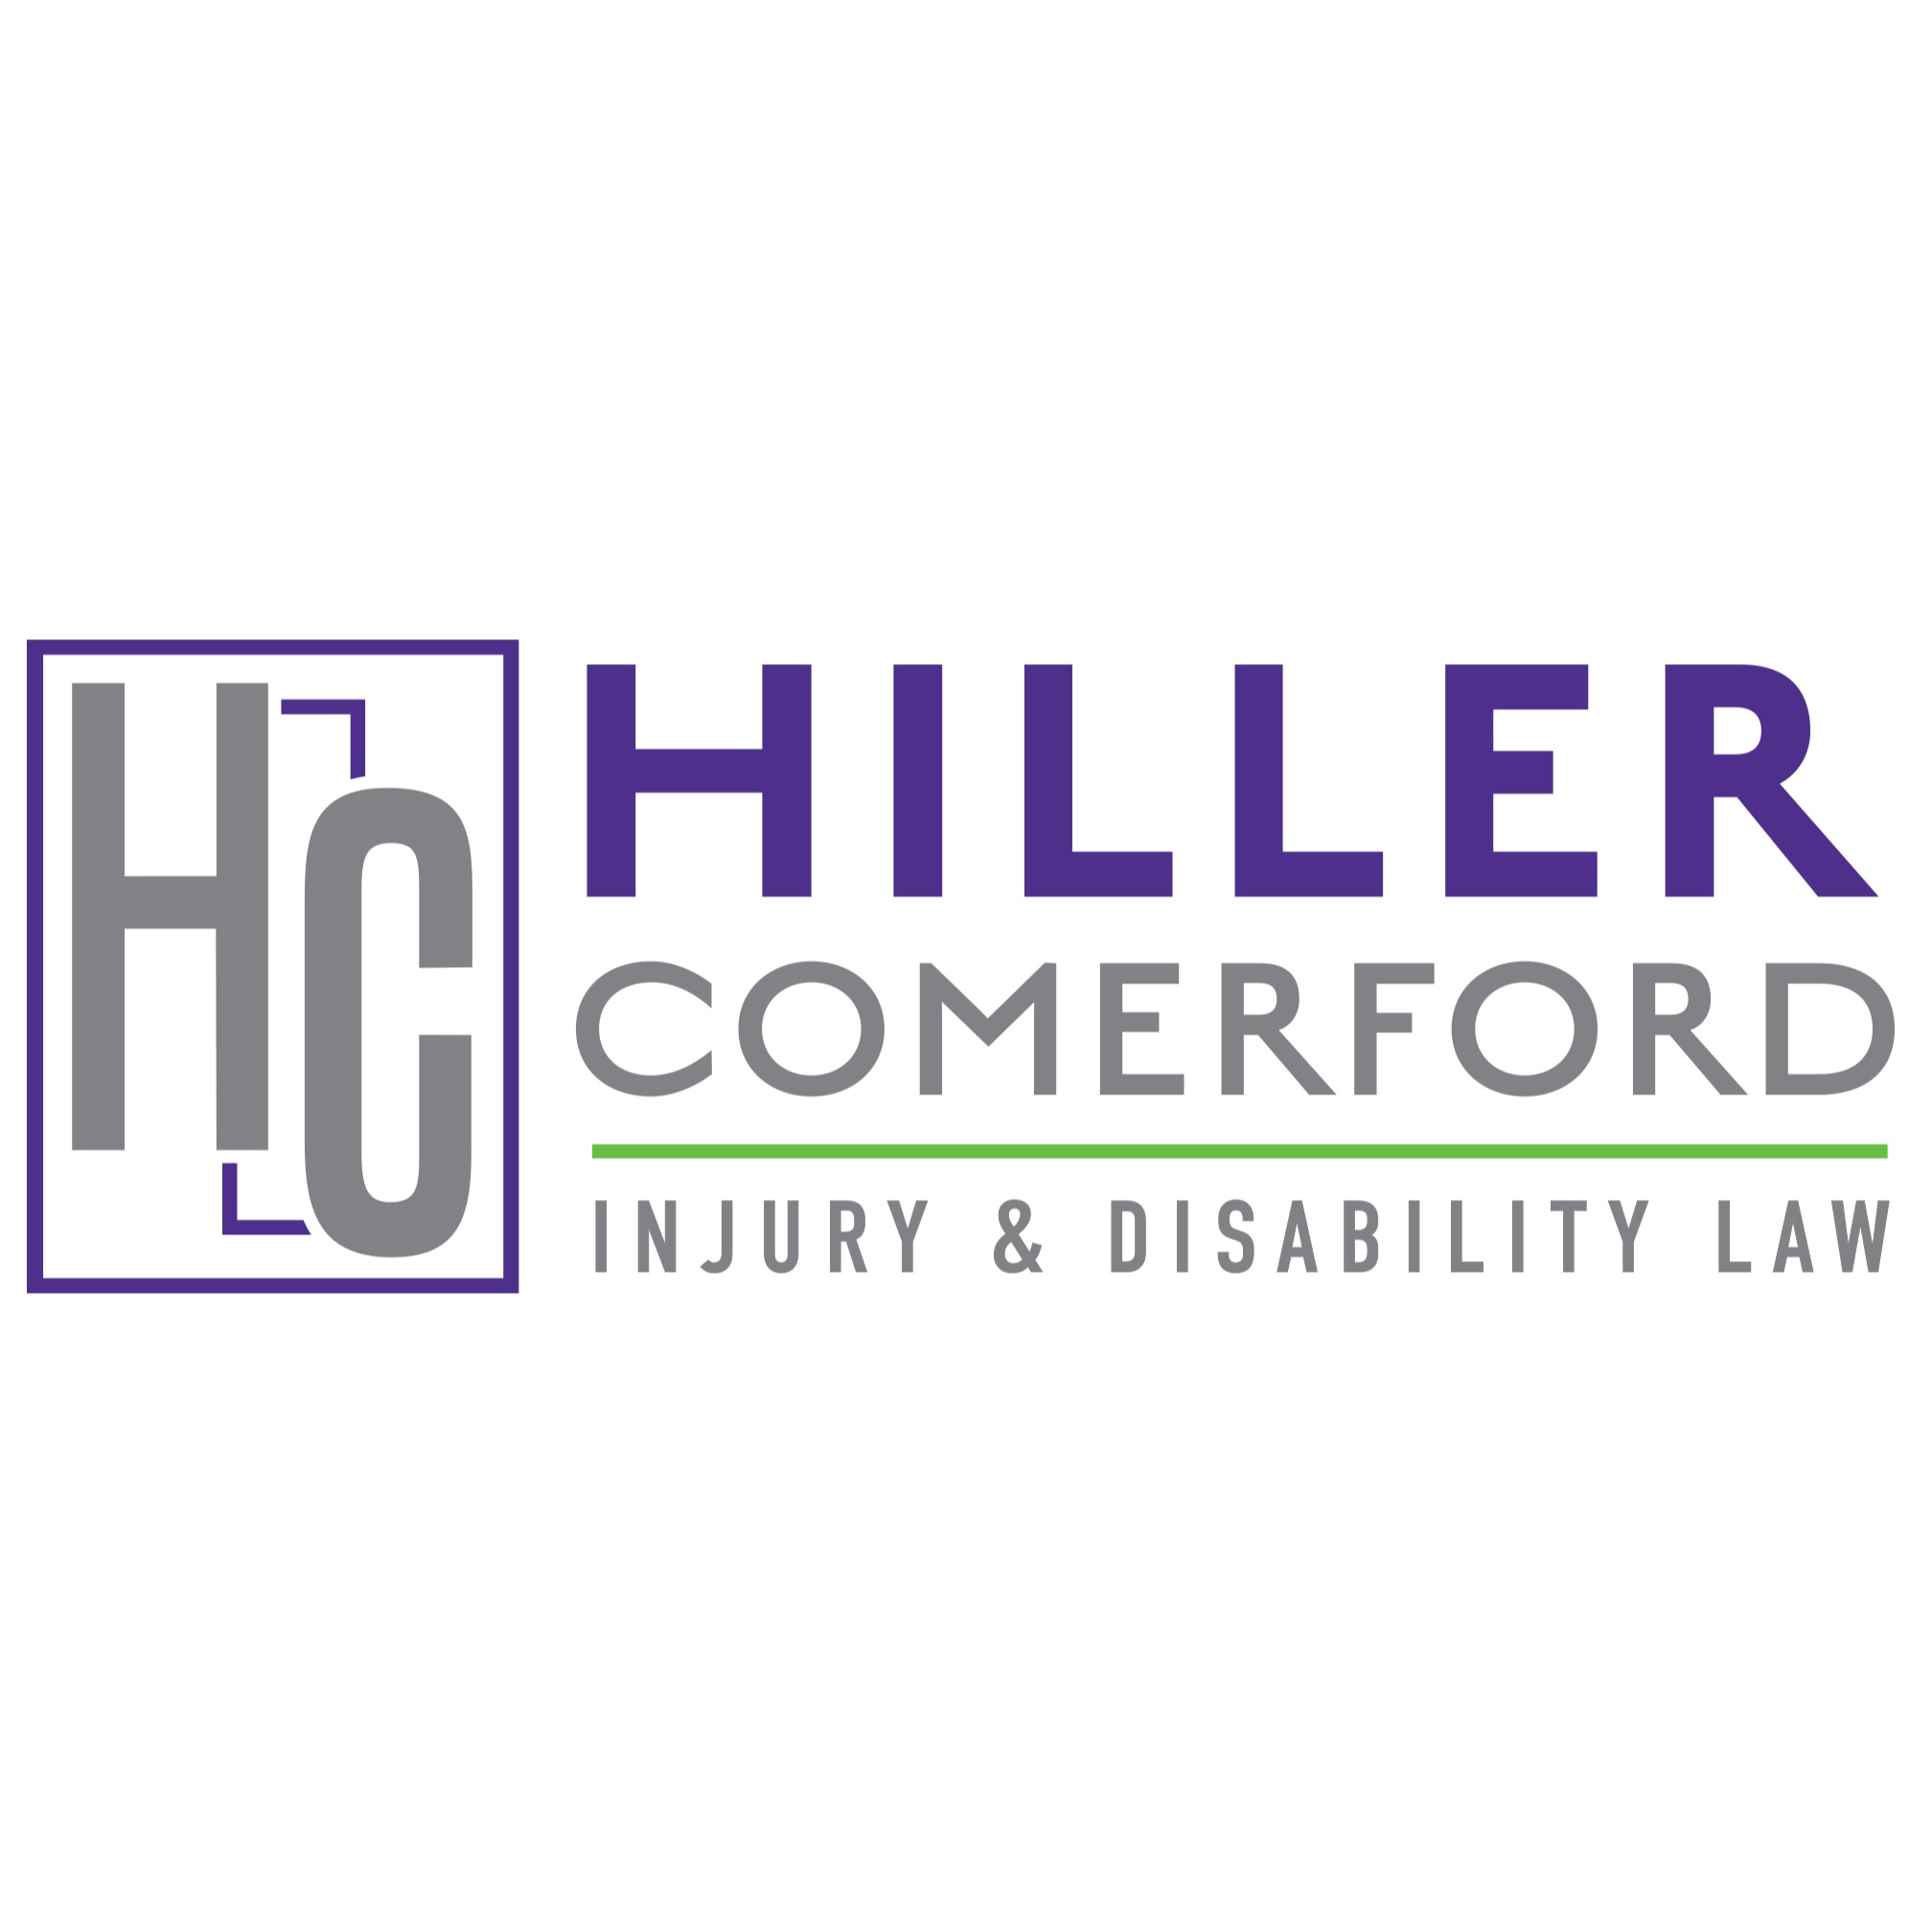 Hiller Comerford Injury & Disability Law - Southfield, MI 48034 - (866)445-5375 | ShowMeLocal.com